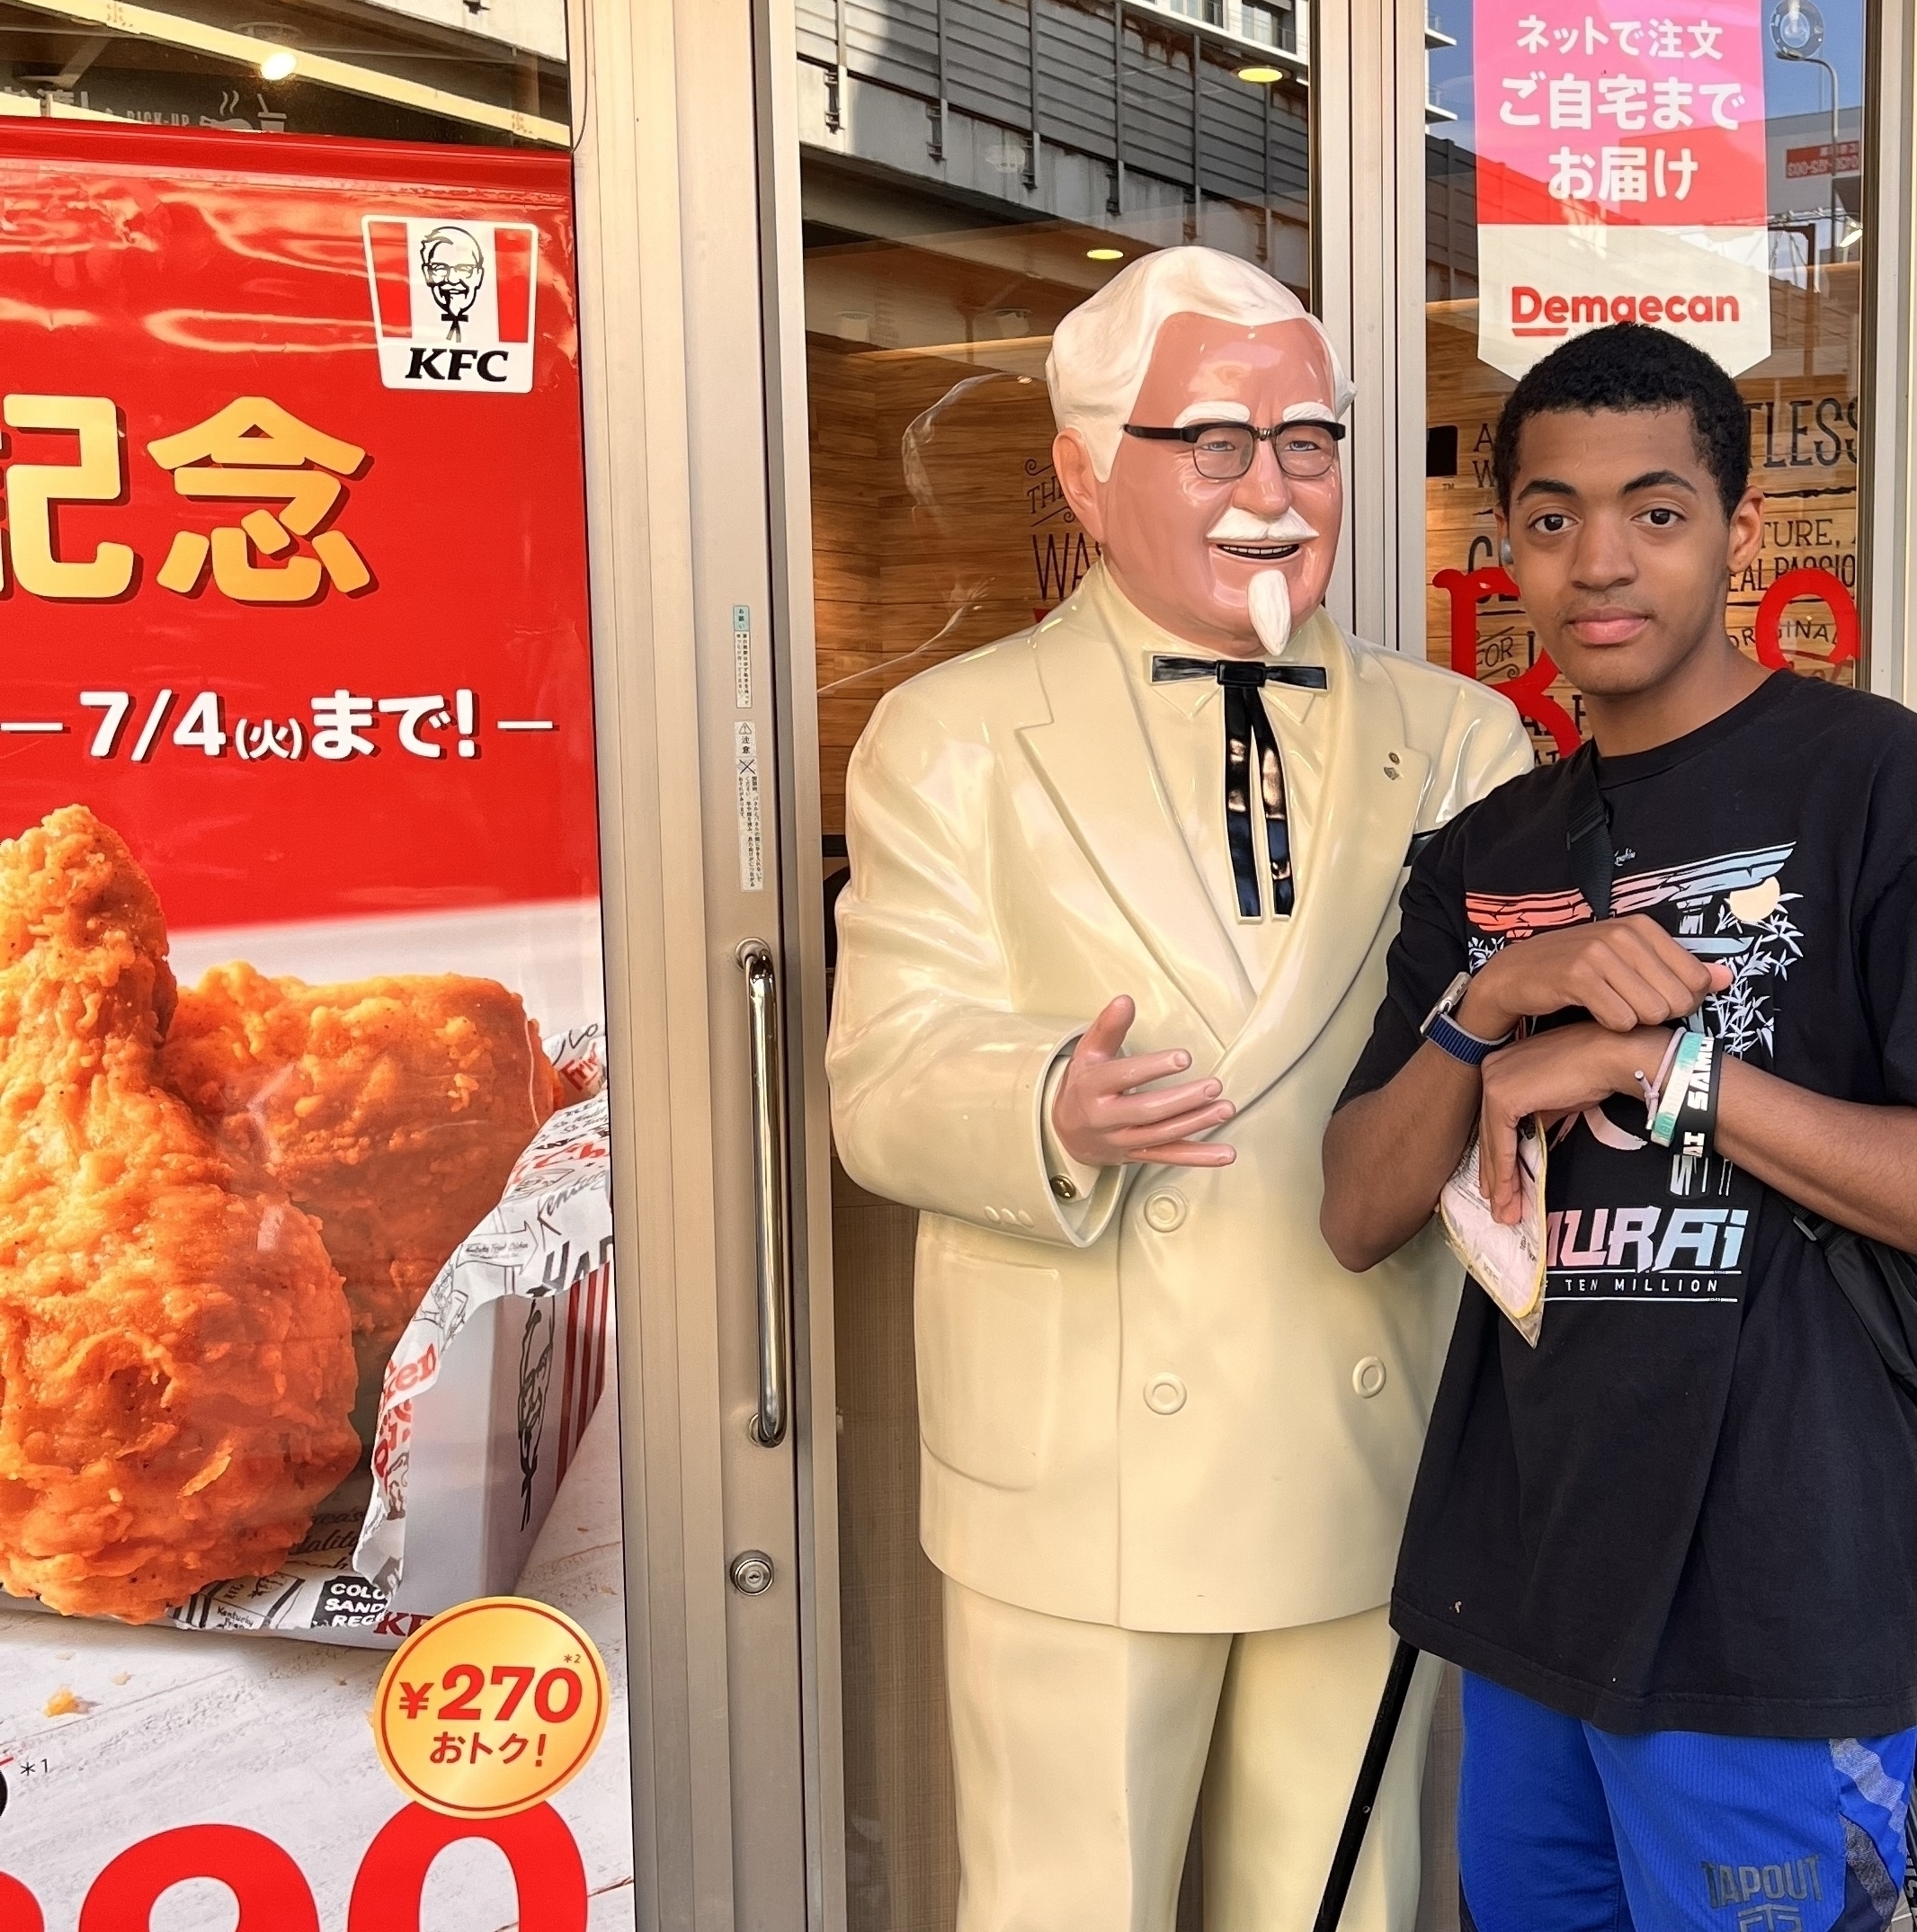 Hackney with KFC statue in Japan